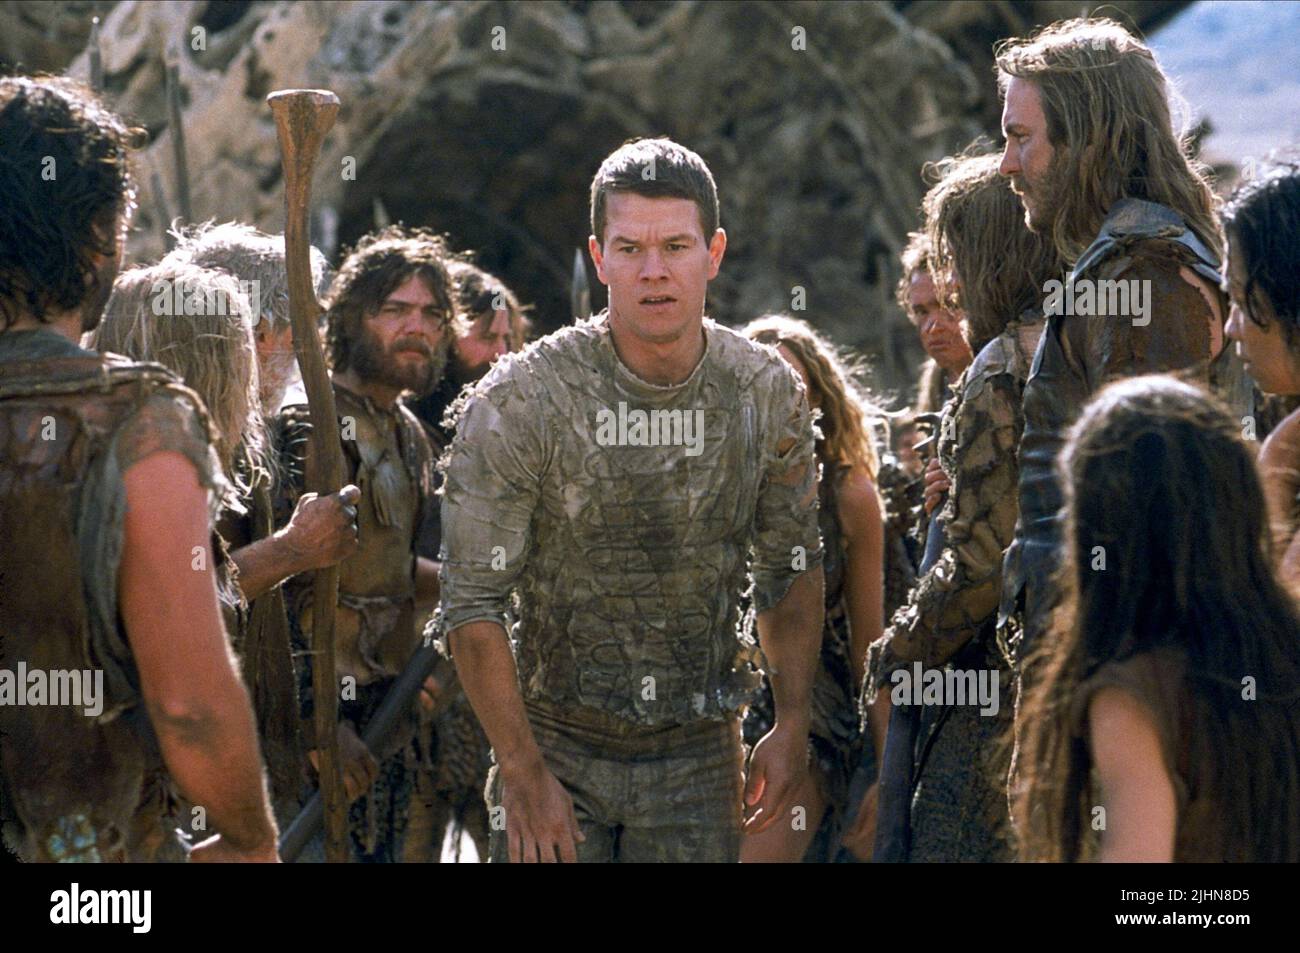 Mark wahlberg planet of the apes -Fotos und -Bildmaterial in hoher  Auflösung – Alamy